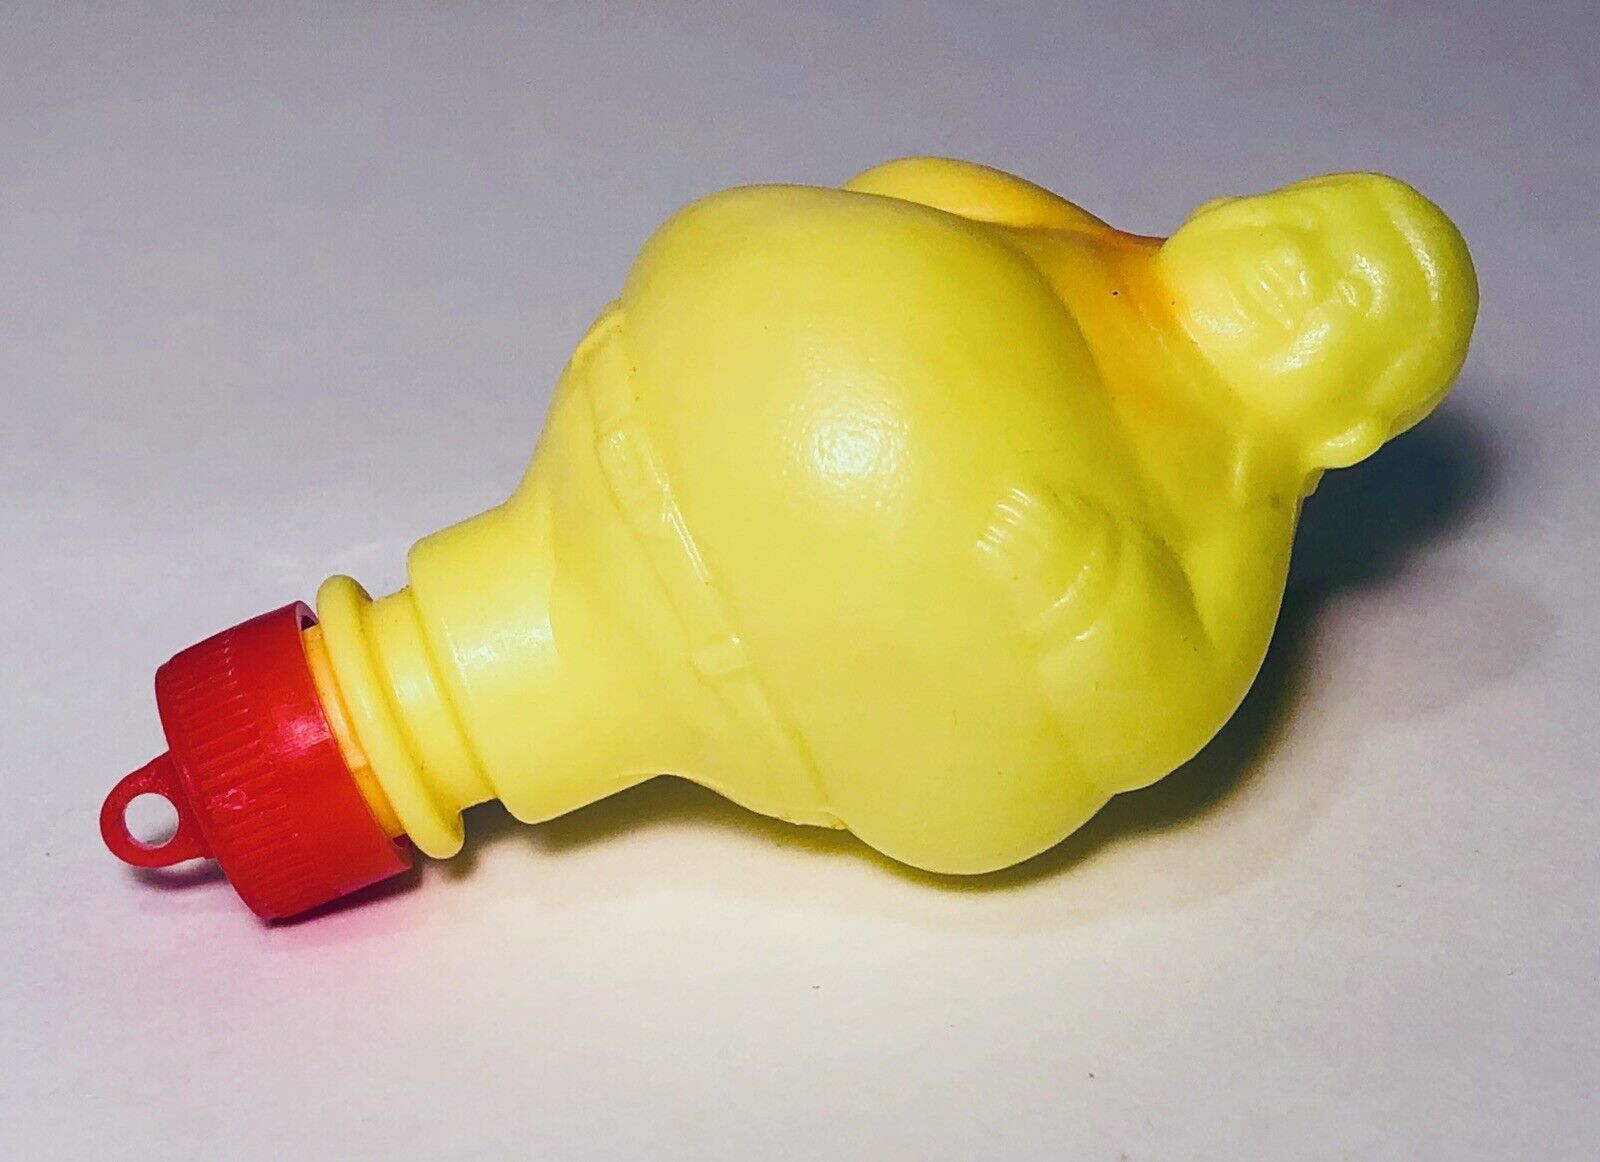 Vintage 1973 Phoenix Co FAT ALBERT SHAKES Candy Container 3.25” YELLOW